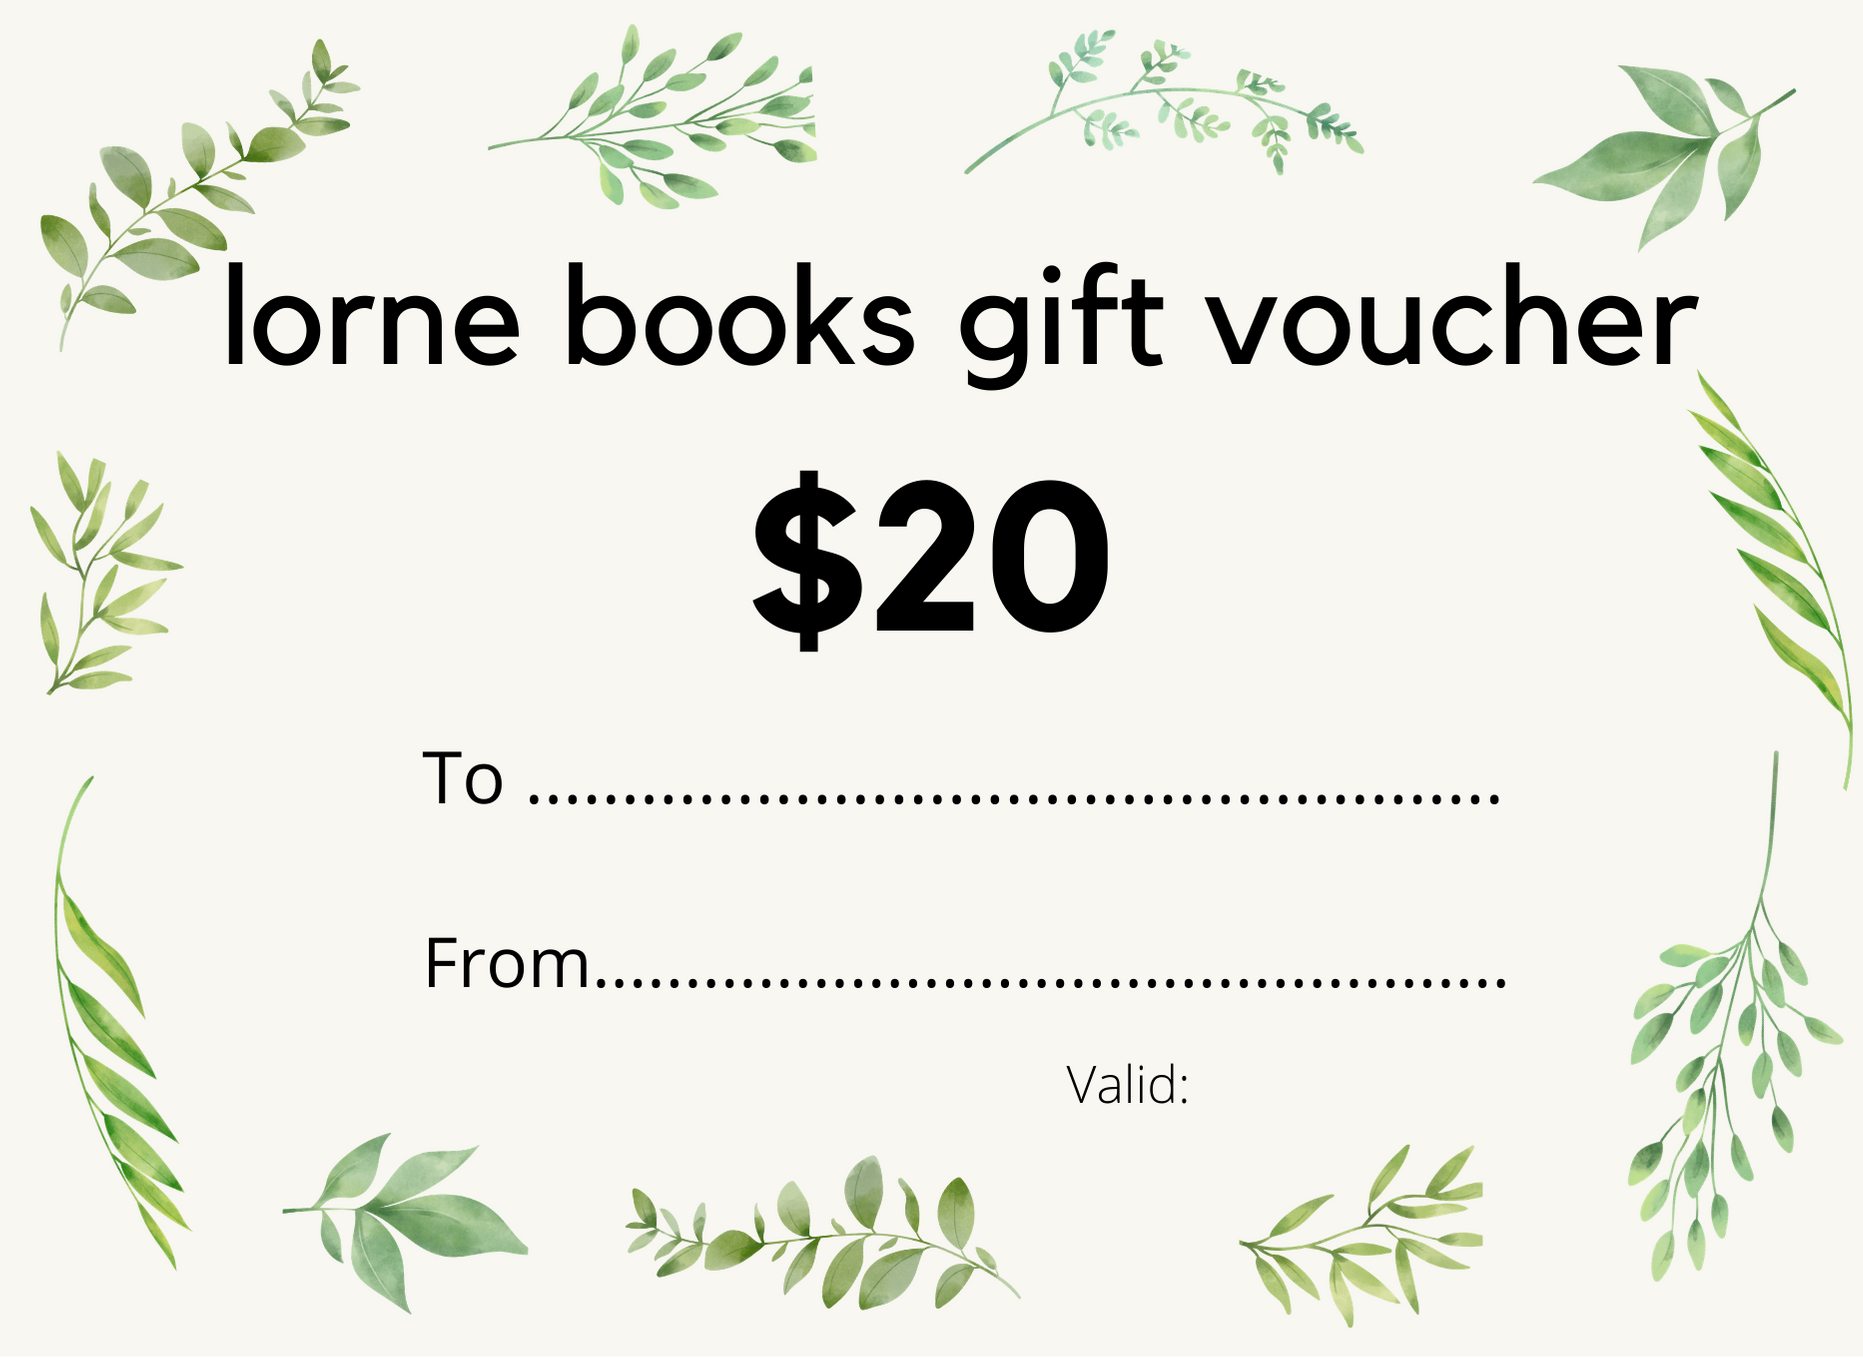 lorne books gift voucher $20.png